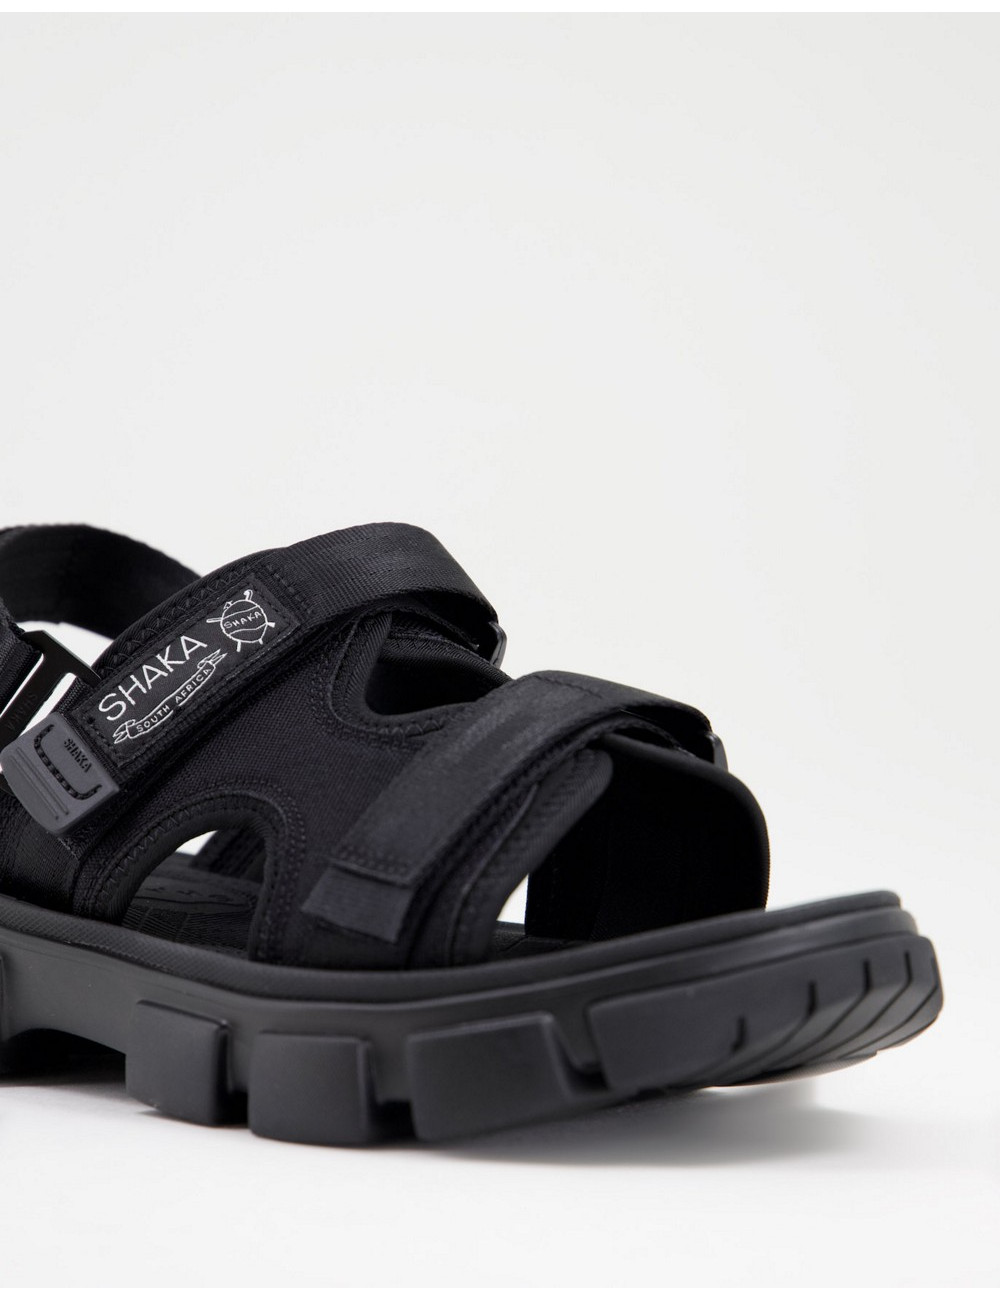 Shaka chill out sf sandals...